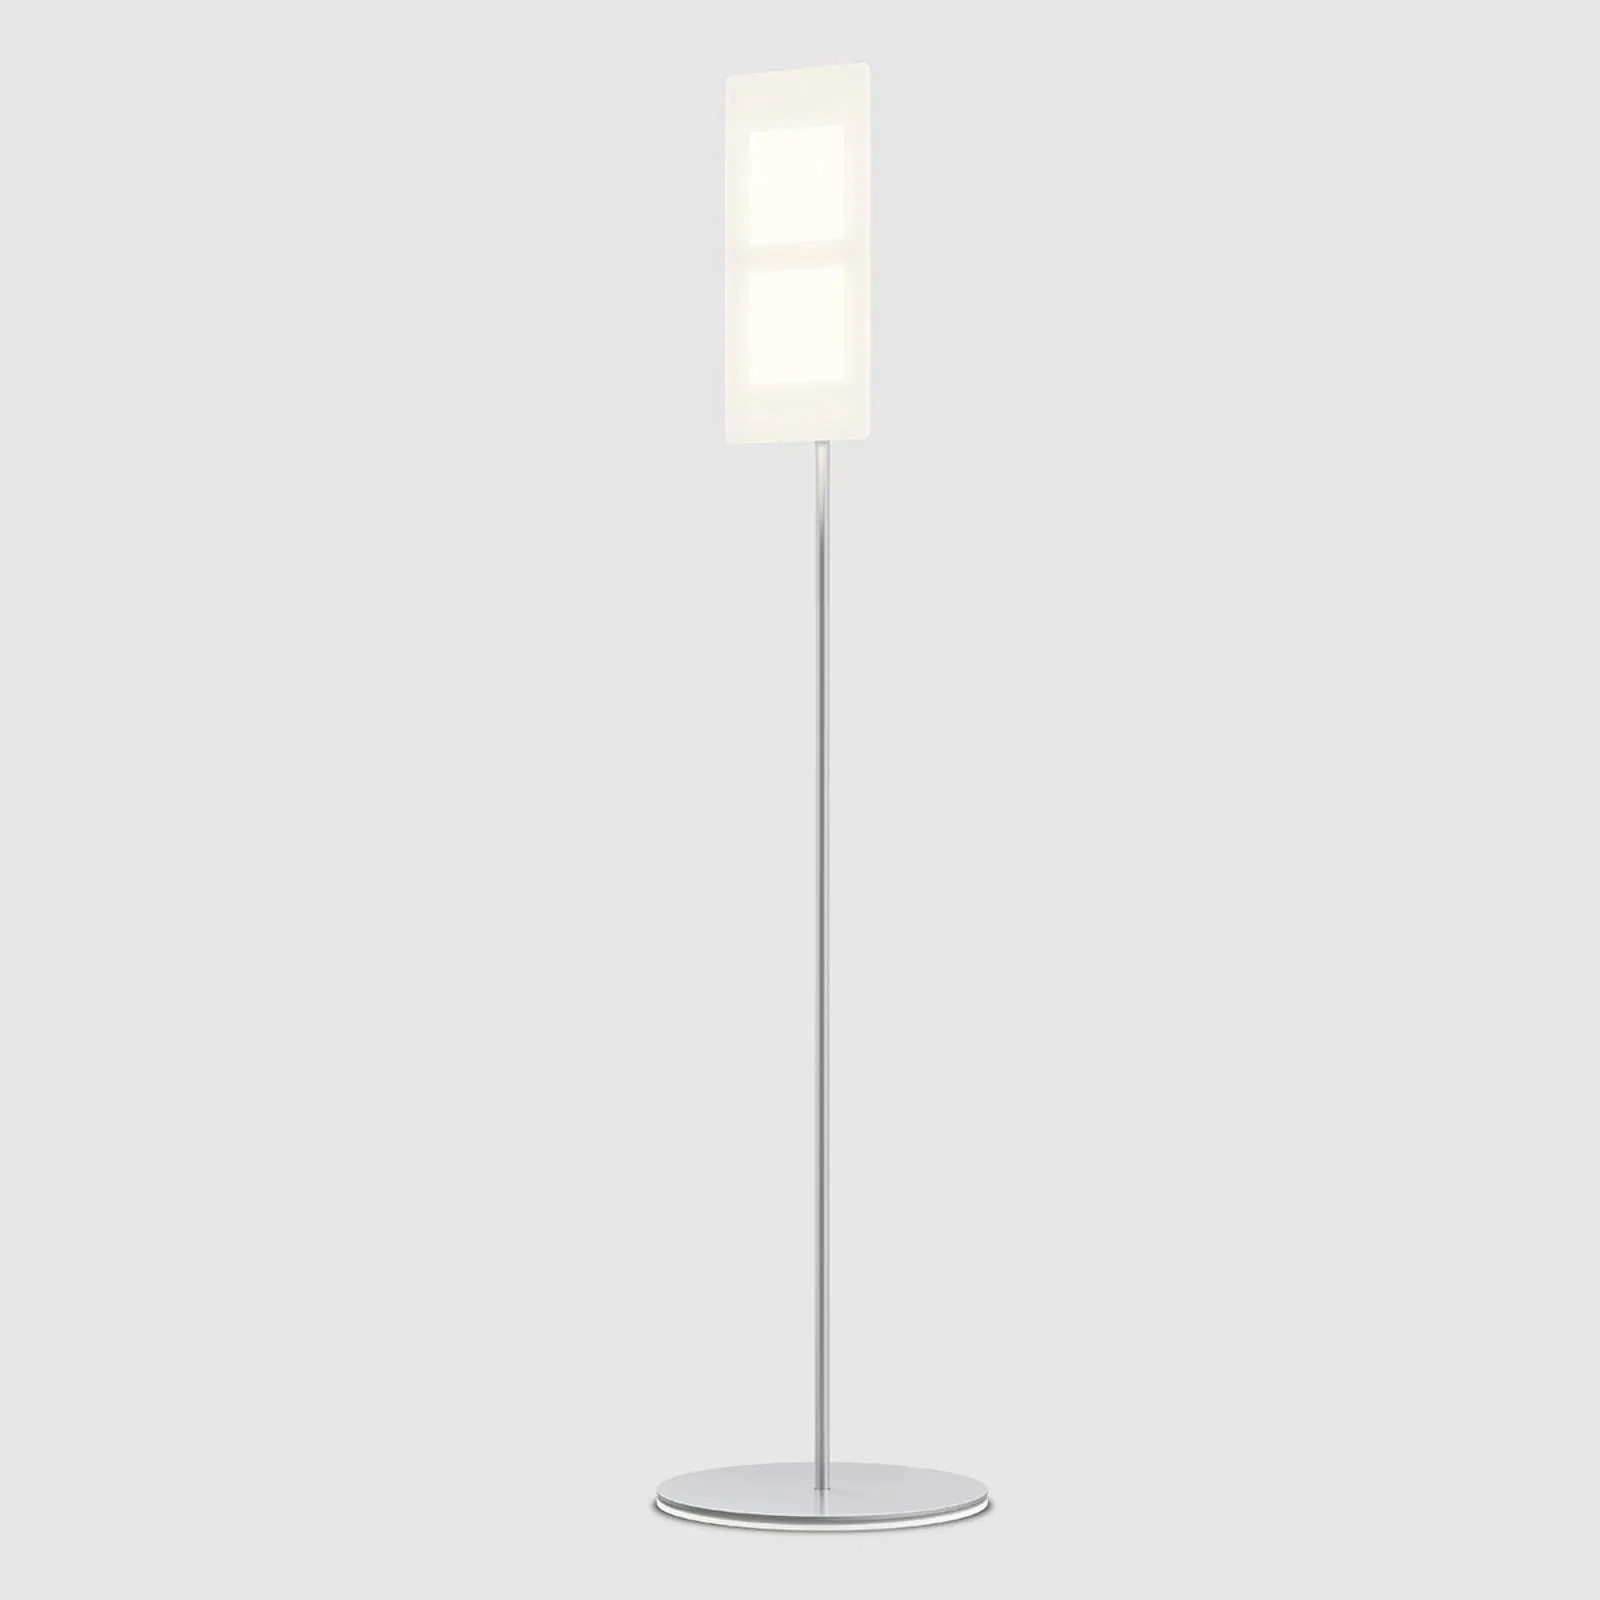 With OLEDs - floor lamp OMLED One f2 white